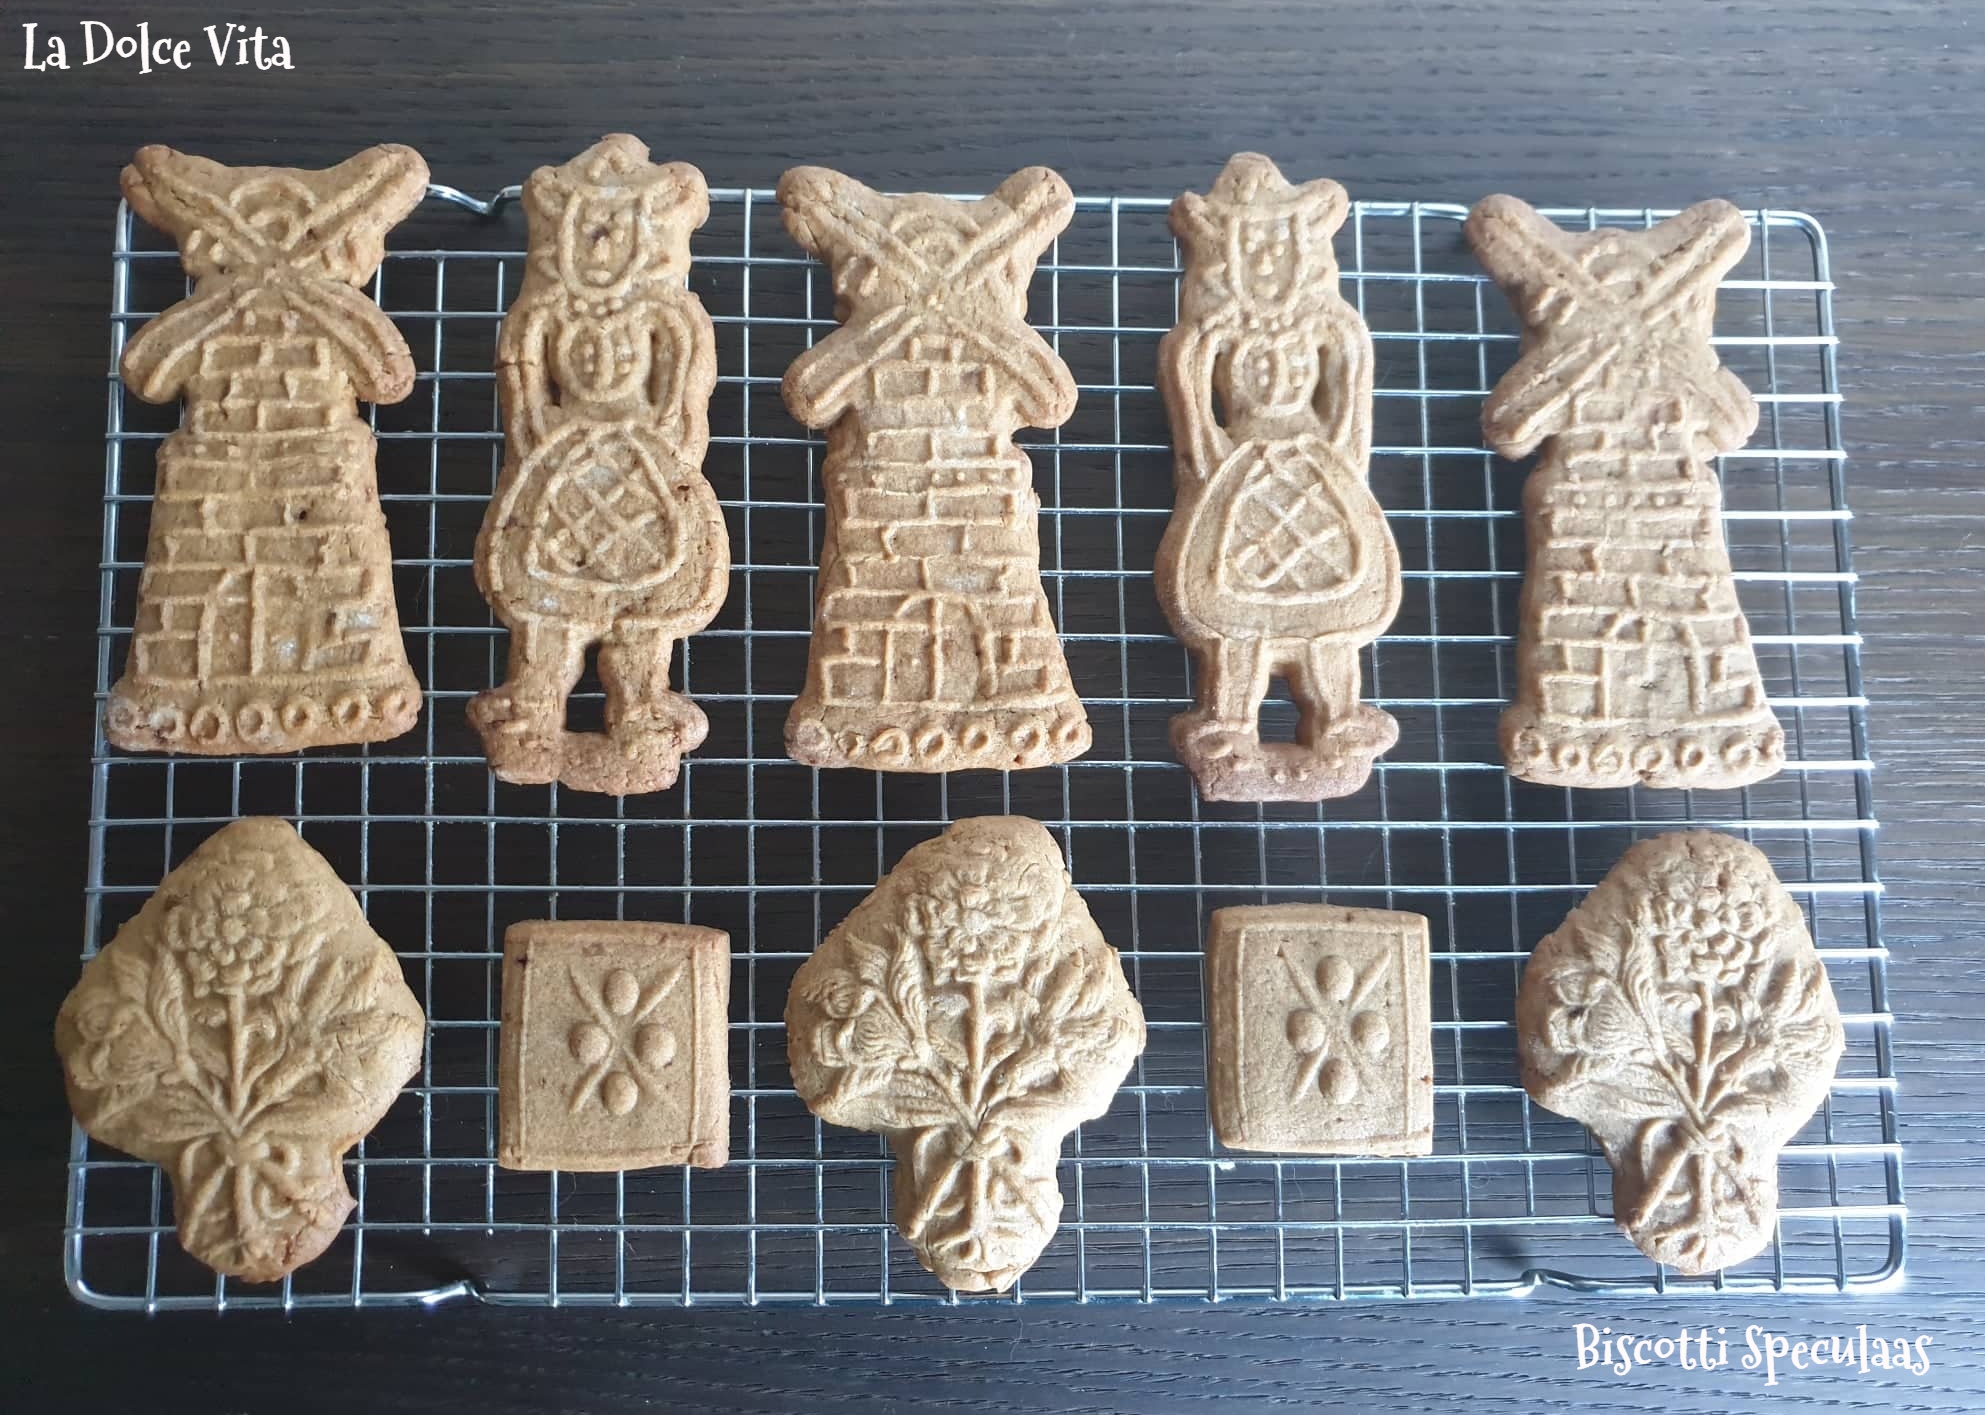 Biscotti speculaas